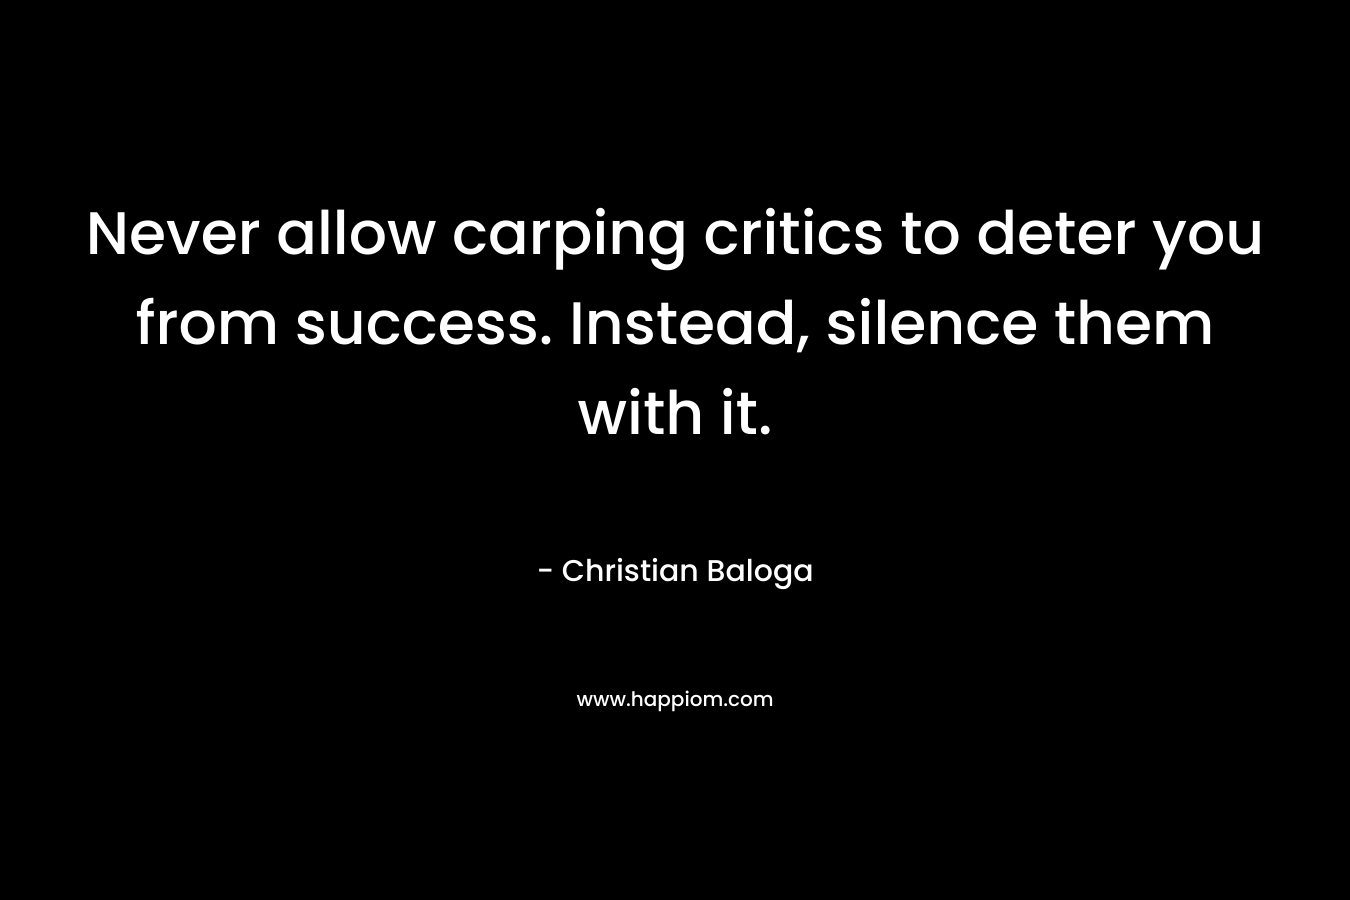 Never allow carping critics to deter you from success. Instead, silence them with it. – Christian Baloga